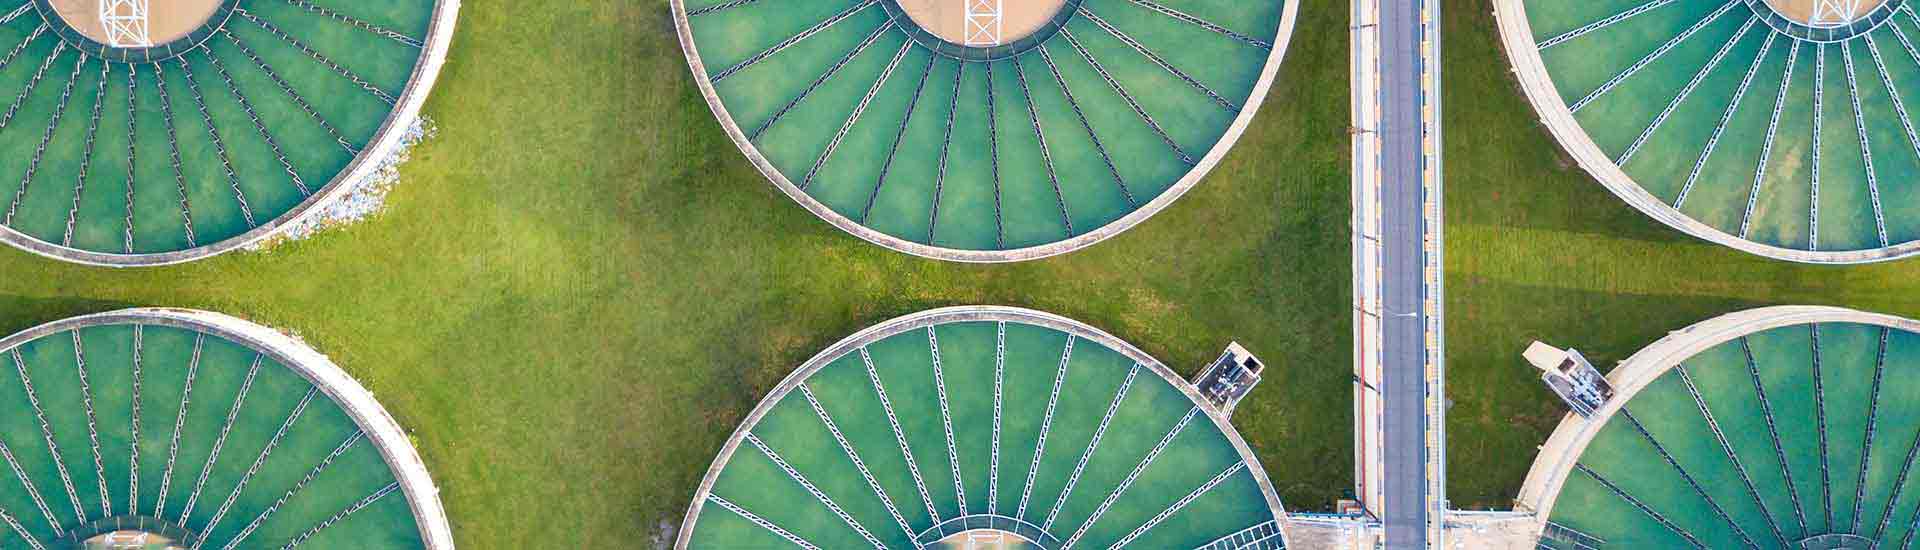 Photo: View from the top of a wastewater treatment plant.